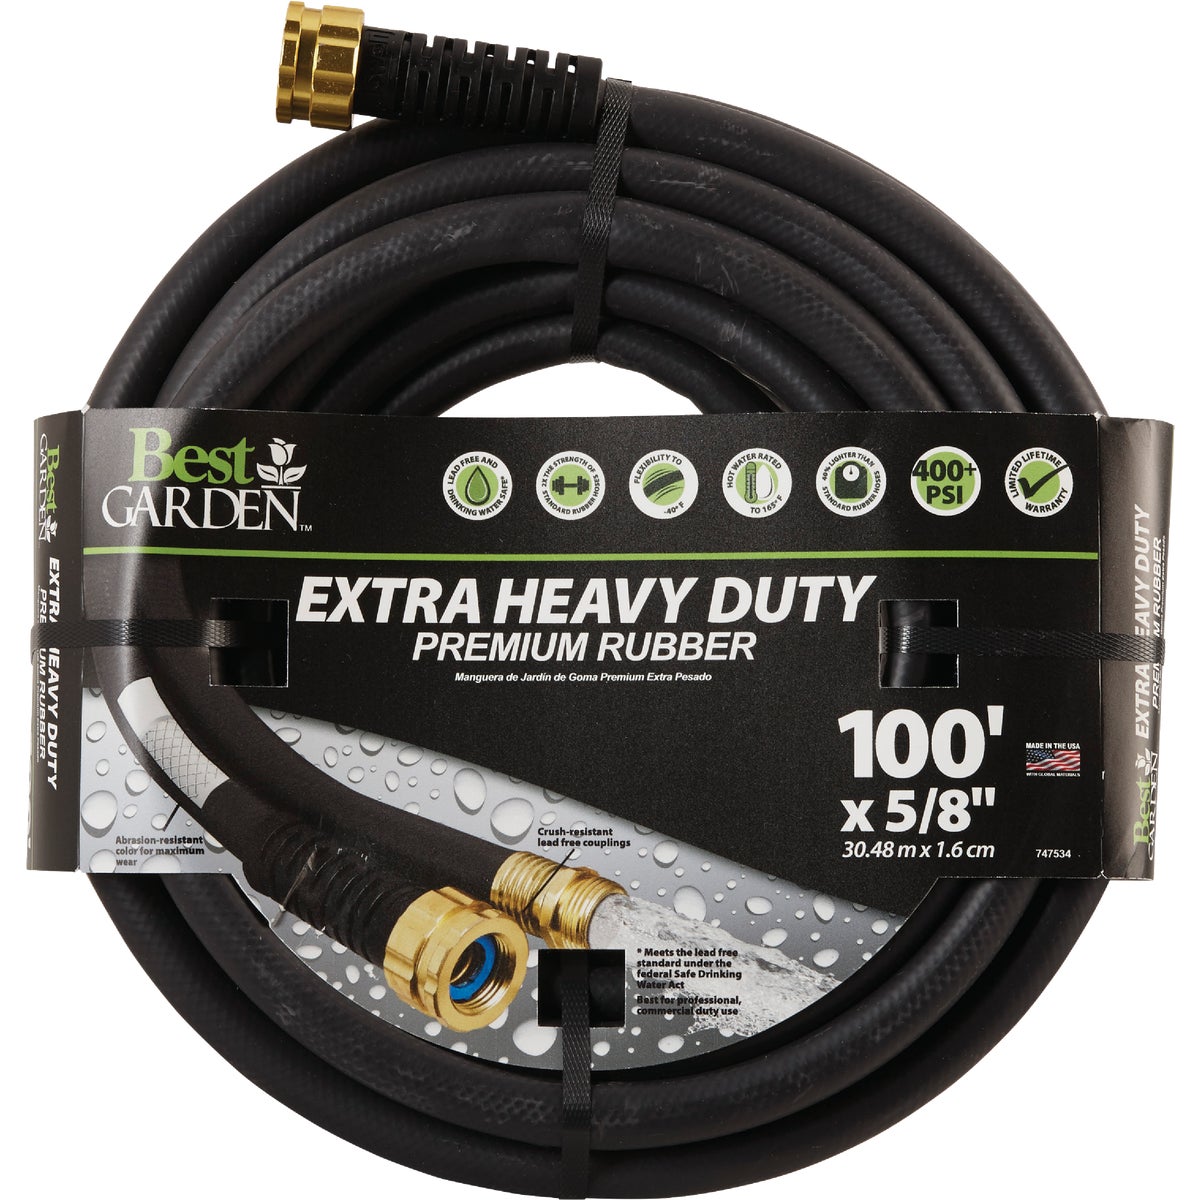 Rubber/Hot Water Hose